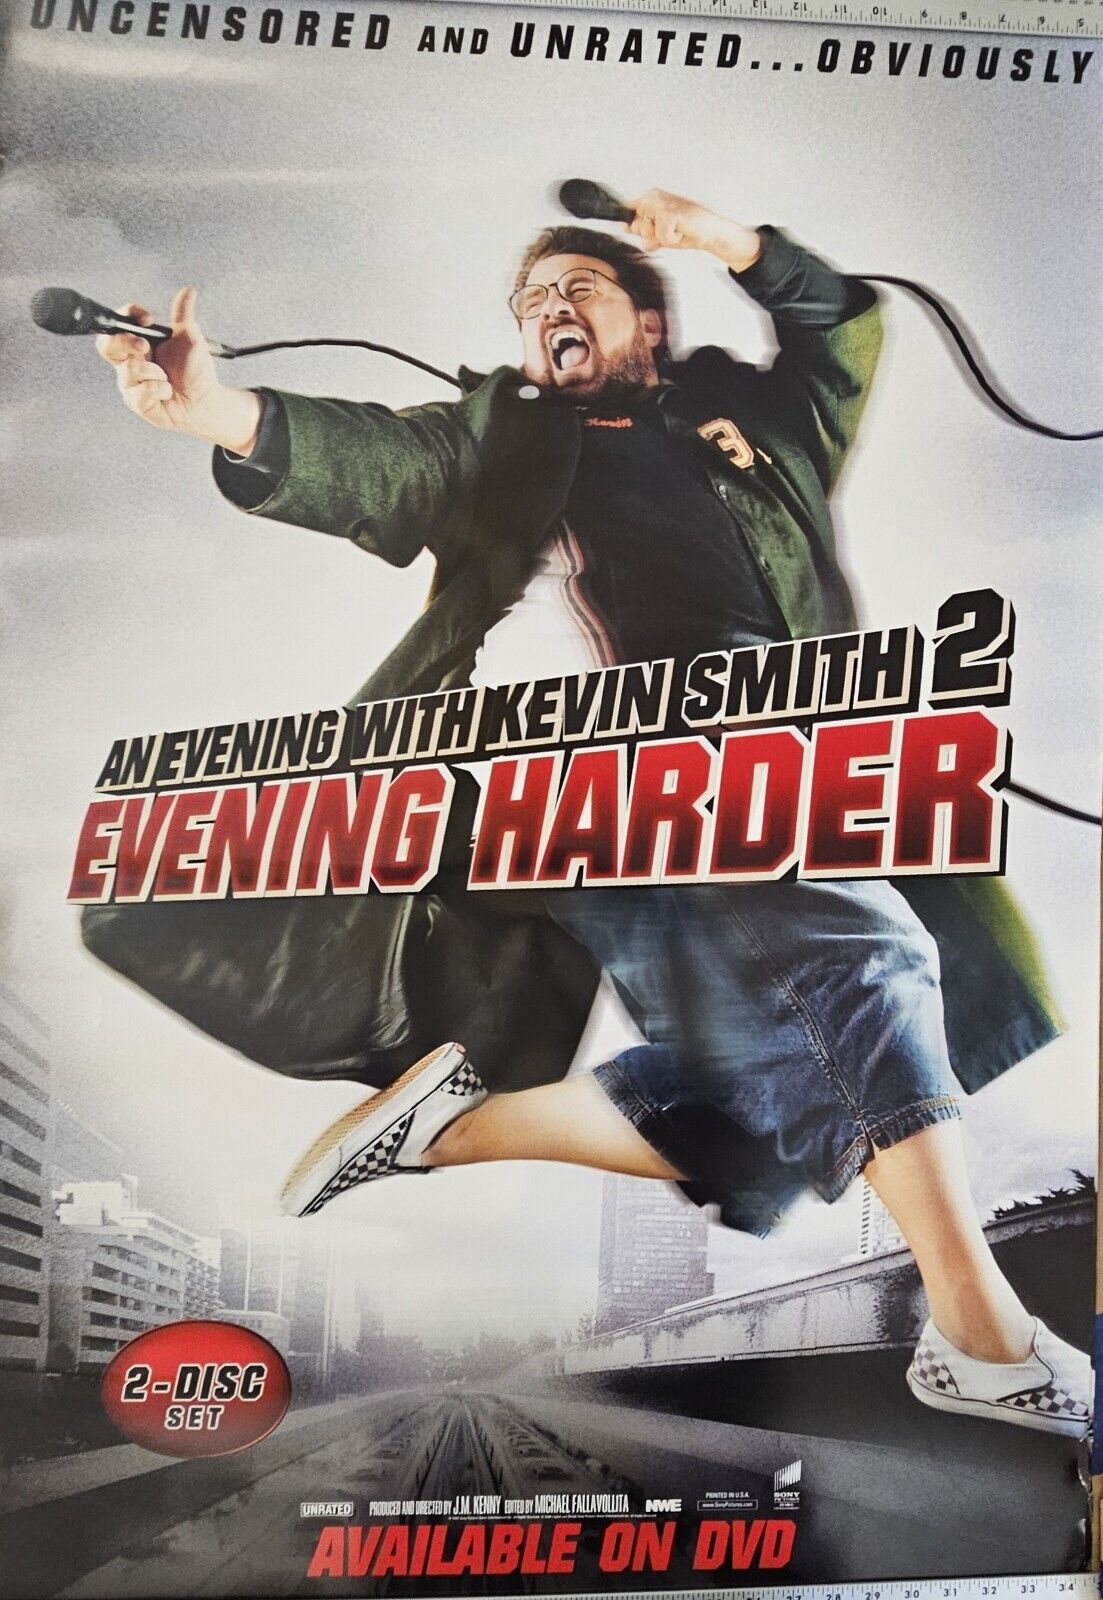 An evening With KEVIN SMITH 2 EVENING HARDER 27 X 40 DVD poster